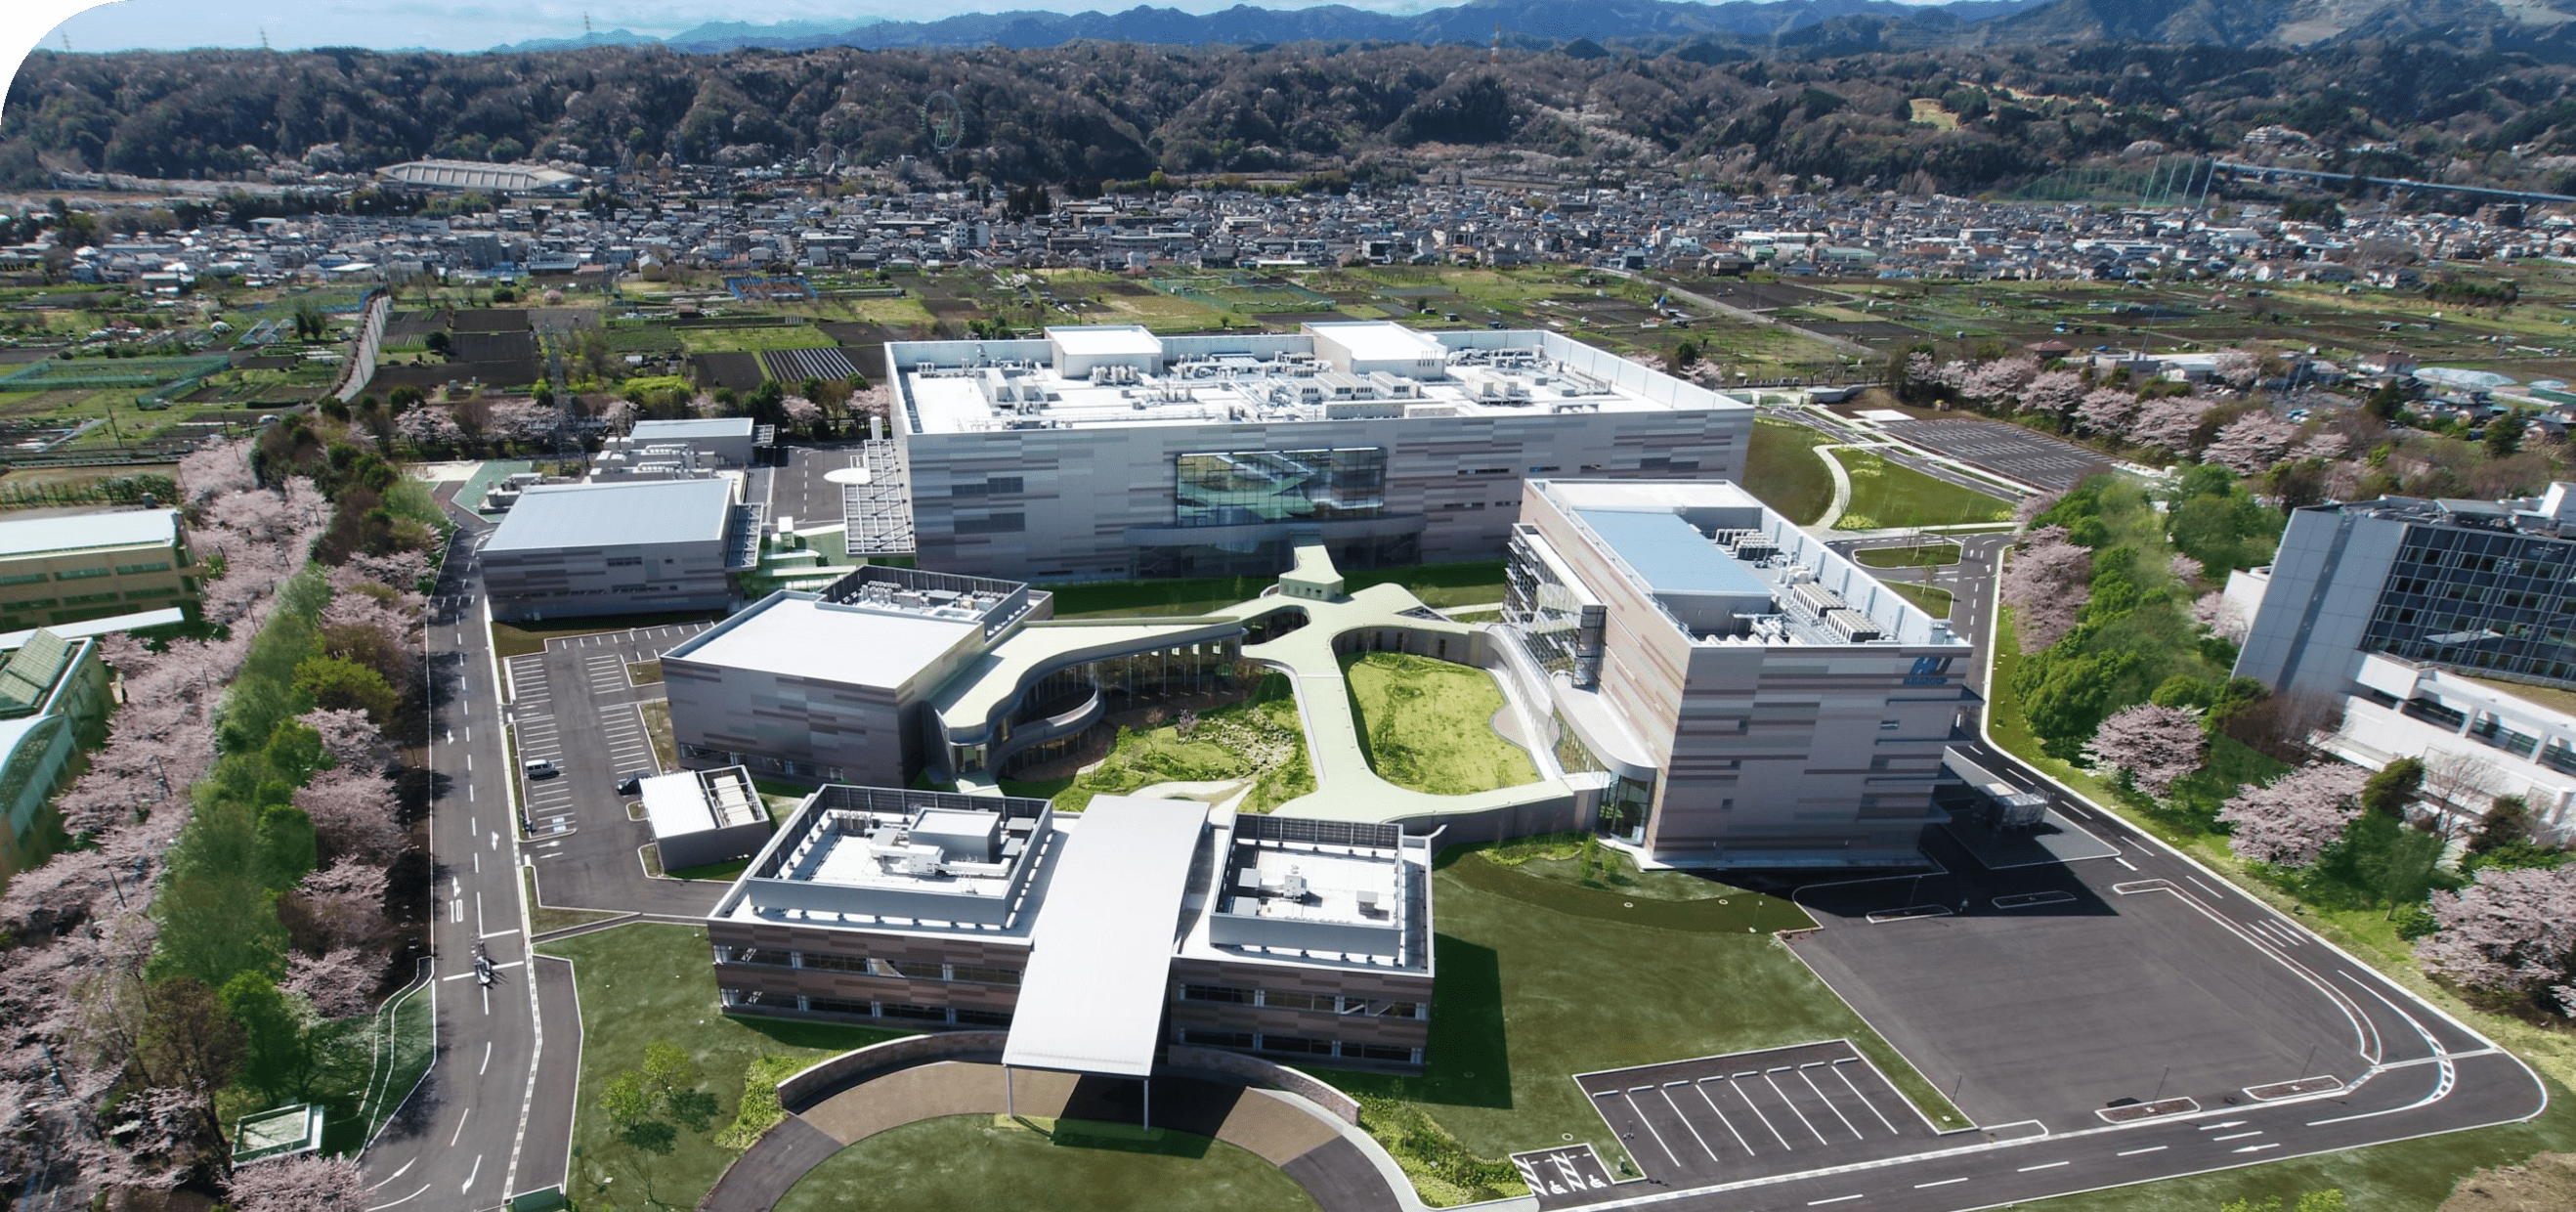 Facility Overview